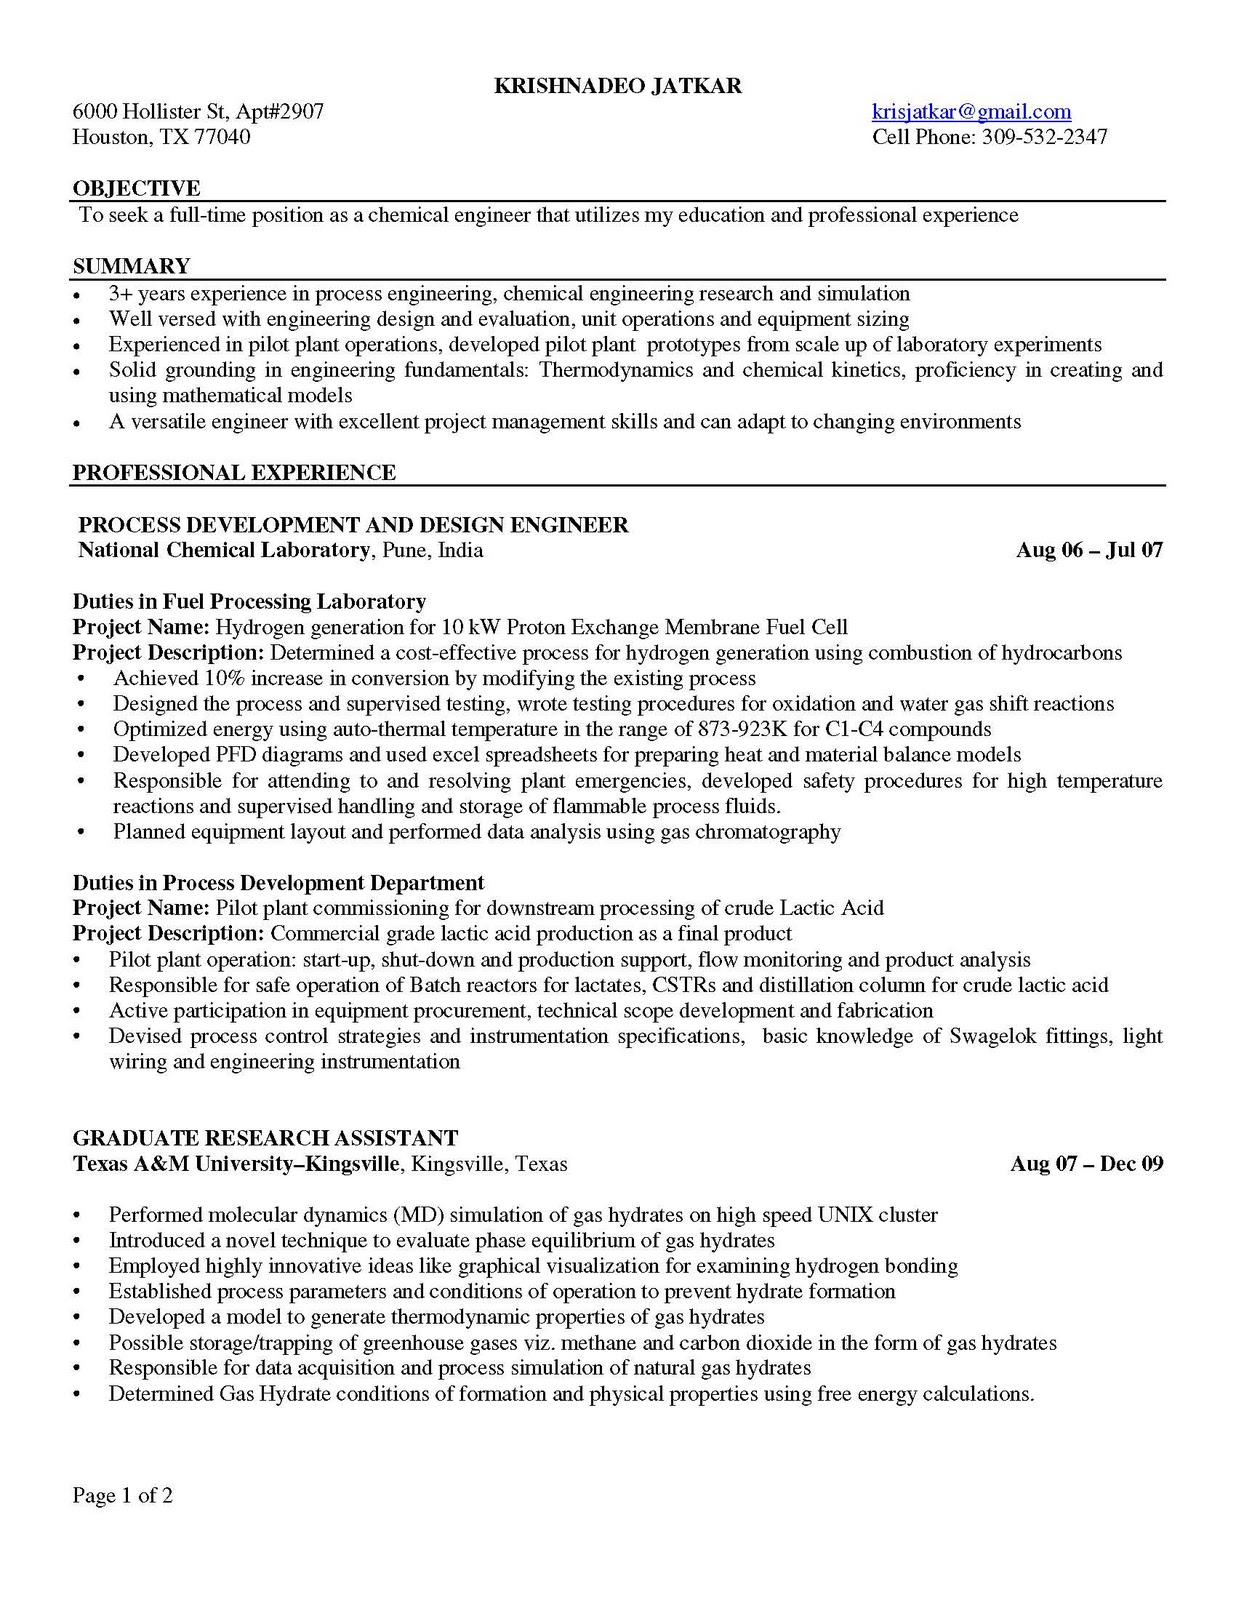 Mechanical Engineering Cover Letter Template - Chemical Engineering Resume Samples Chemical Engineer Resume